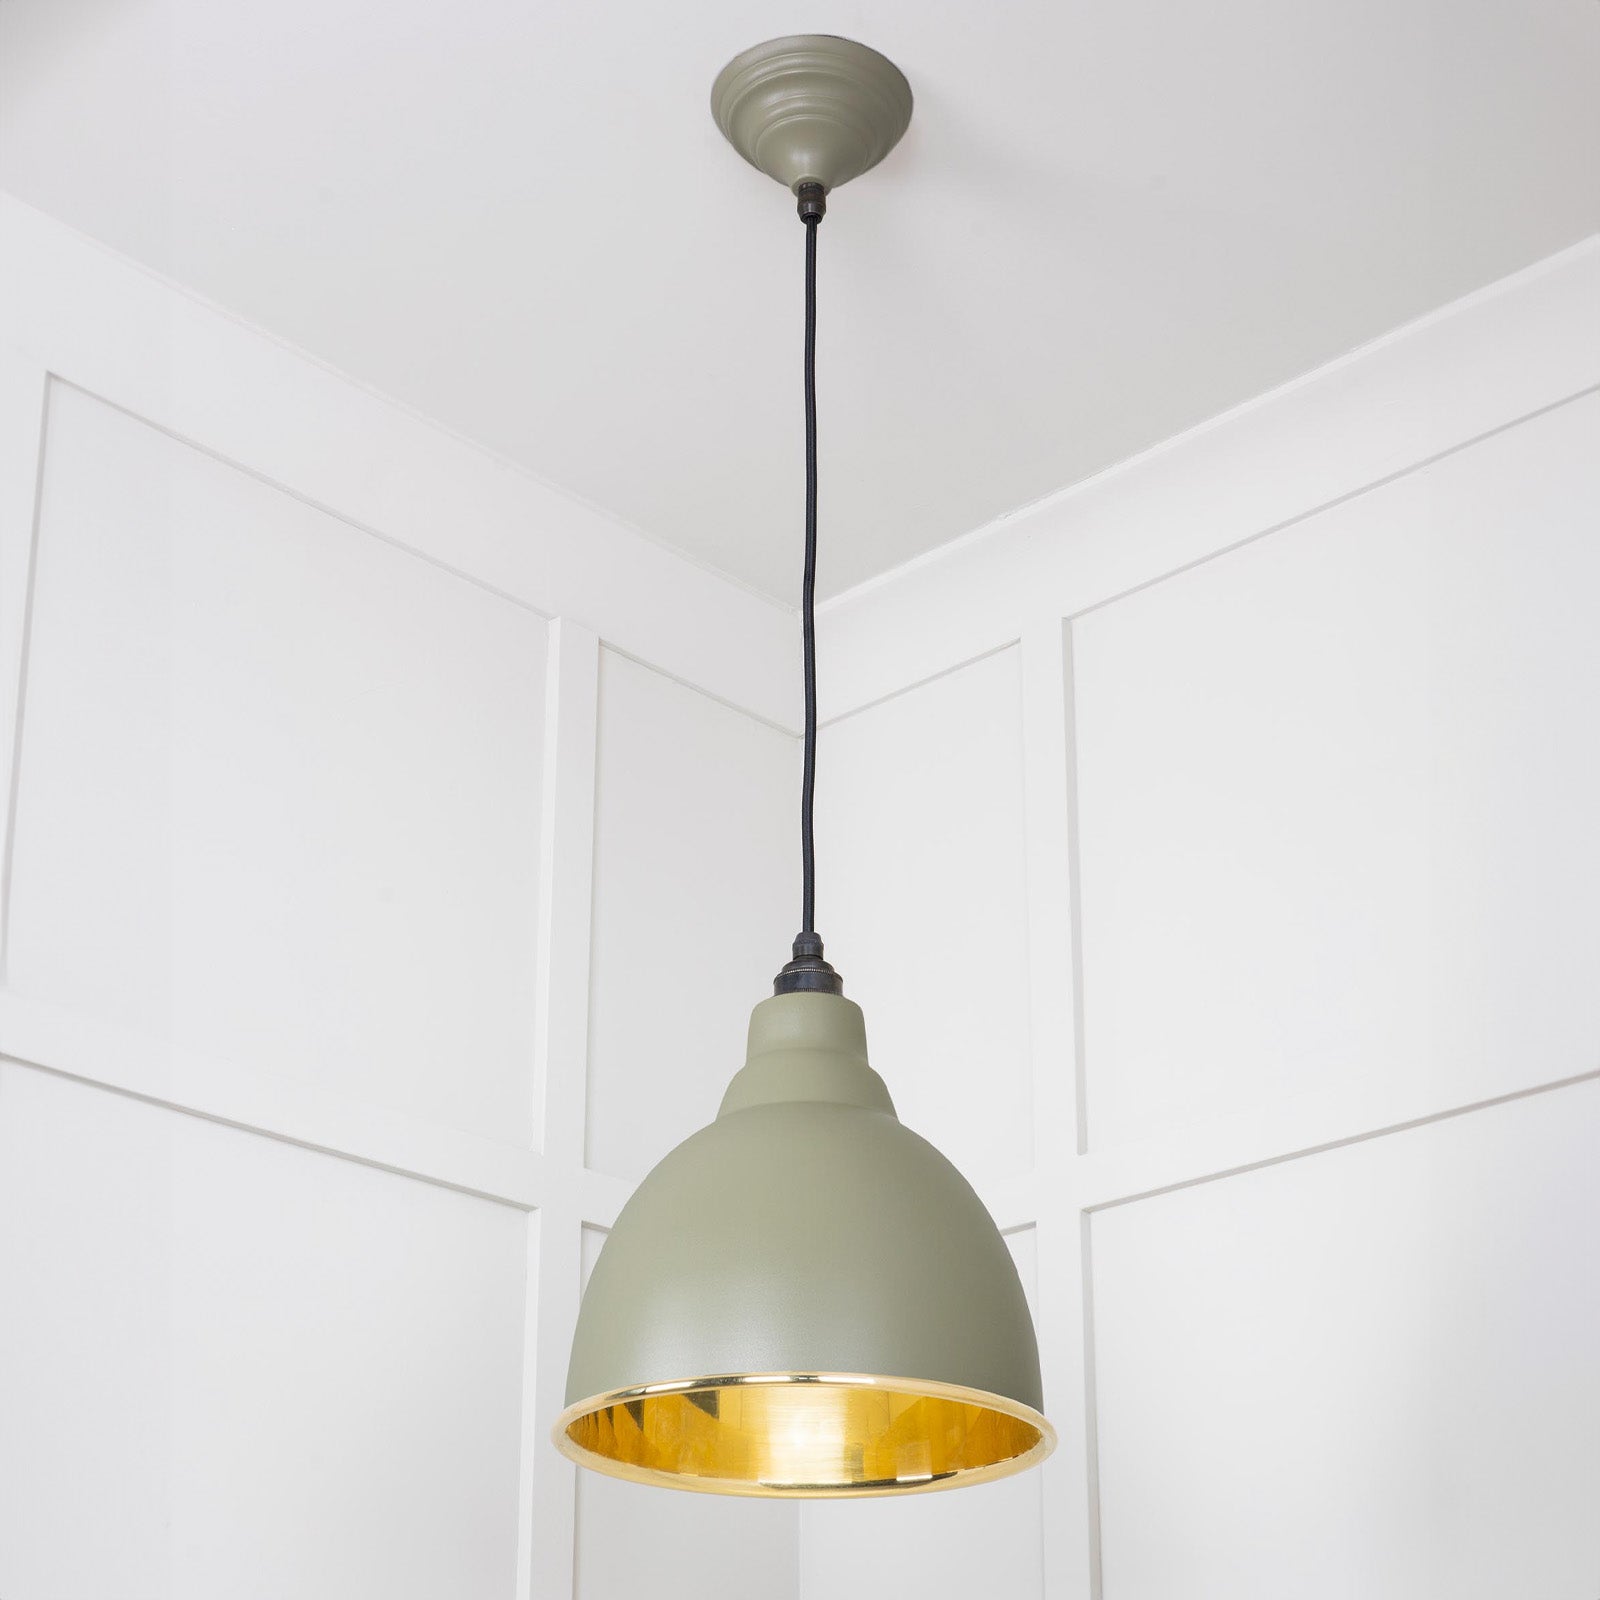 SHOW Full Image of Hanging Brindley Ceiling Light in Tump